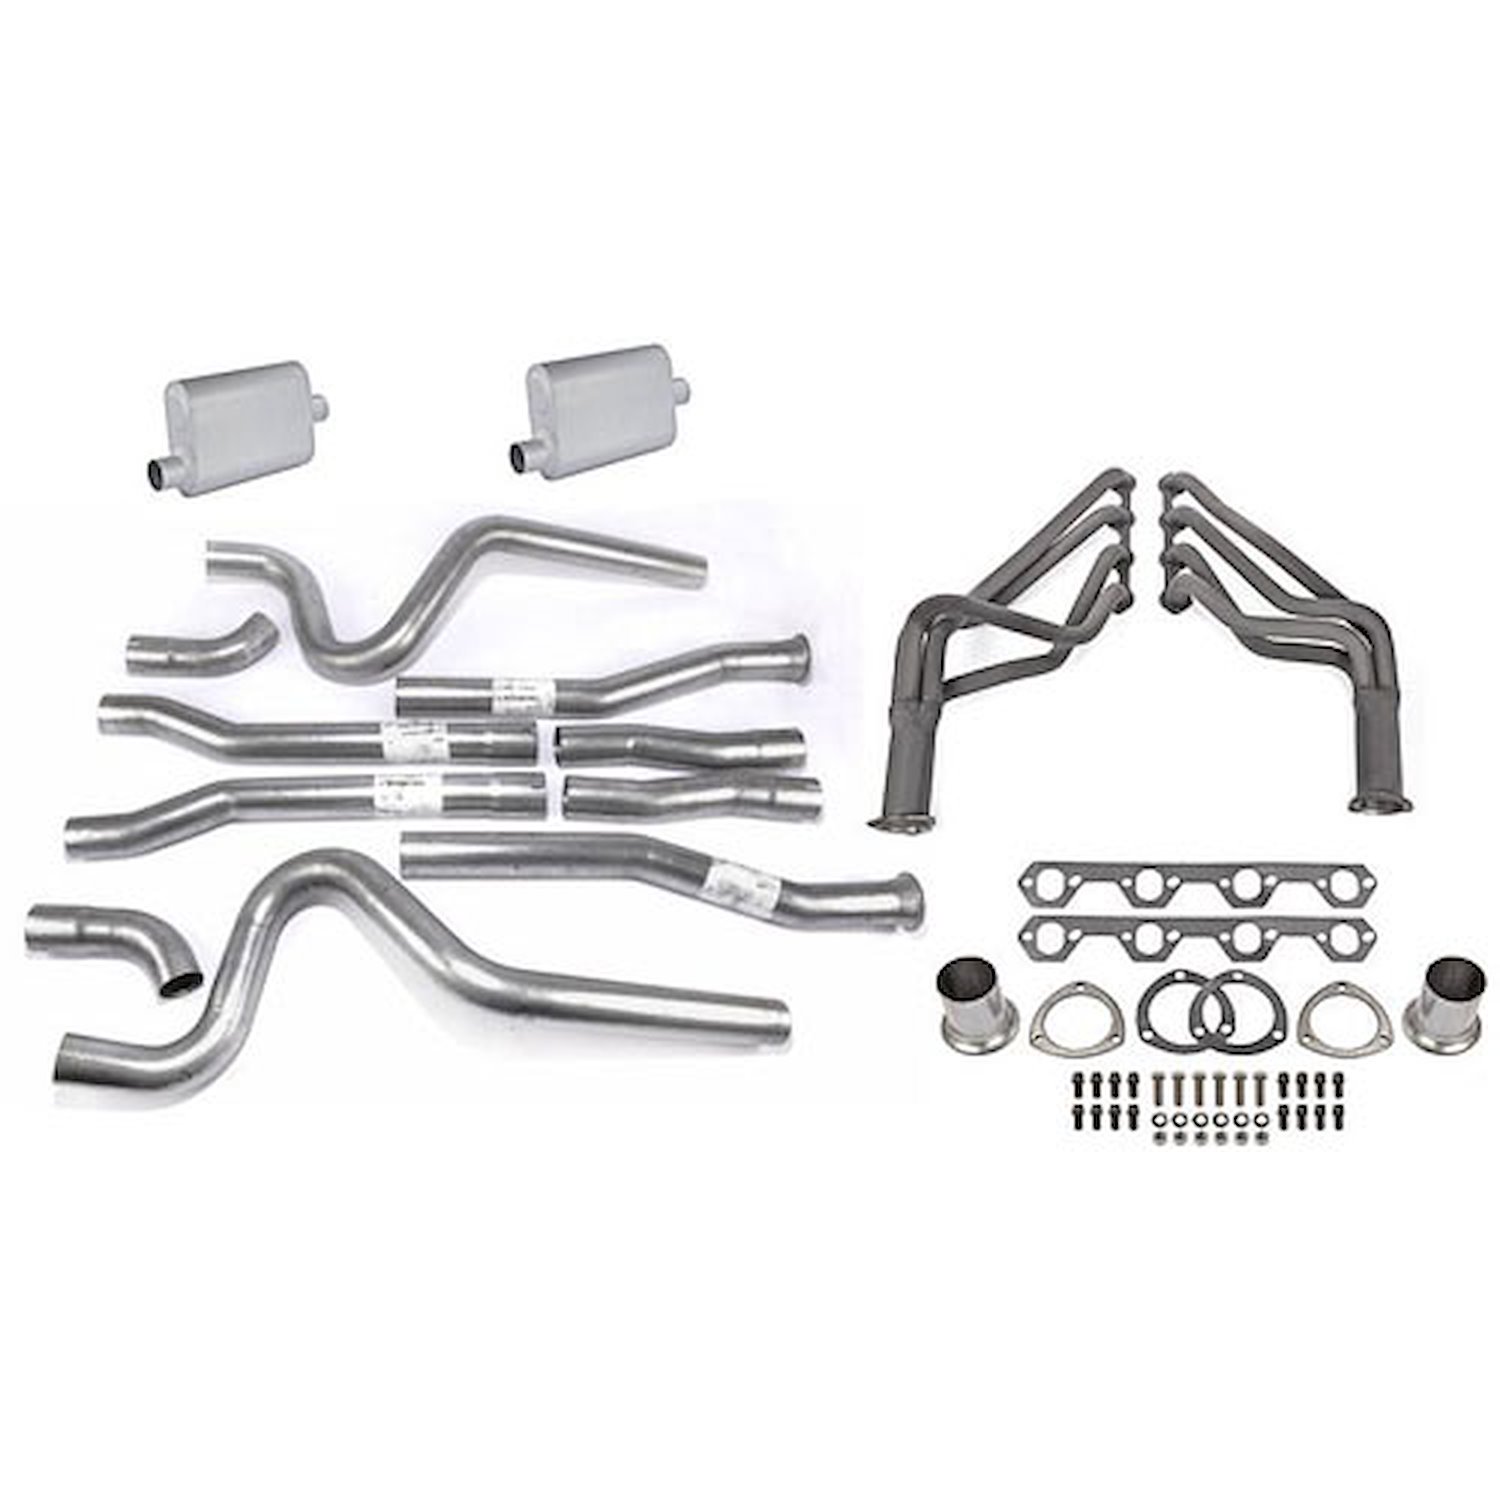 Complete Header Exhaust System Fits: (All Small Block Ford 289-302ci) 1969-73 Mustang